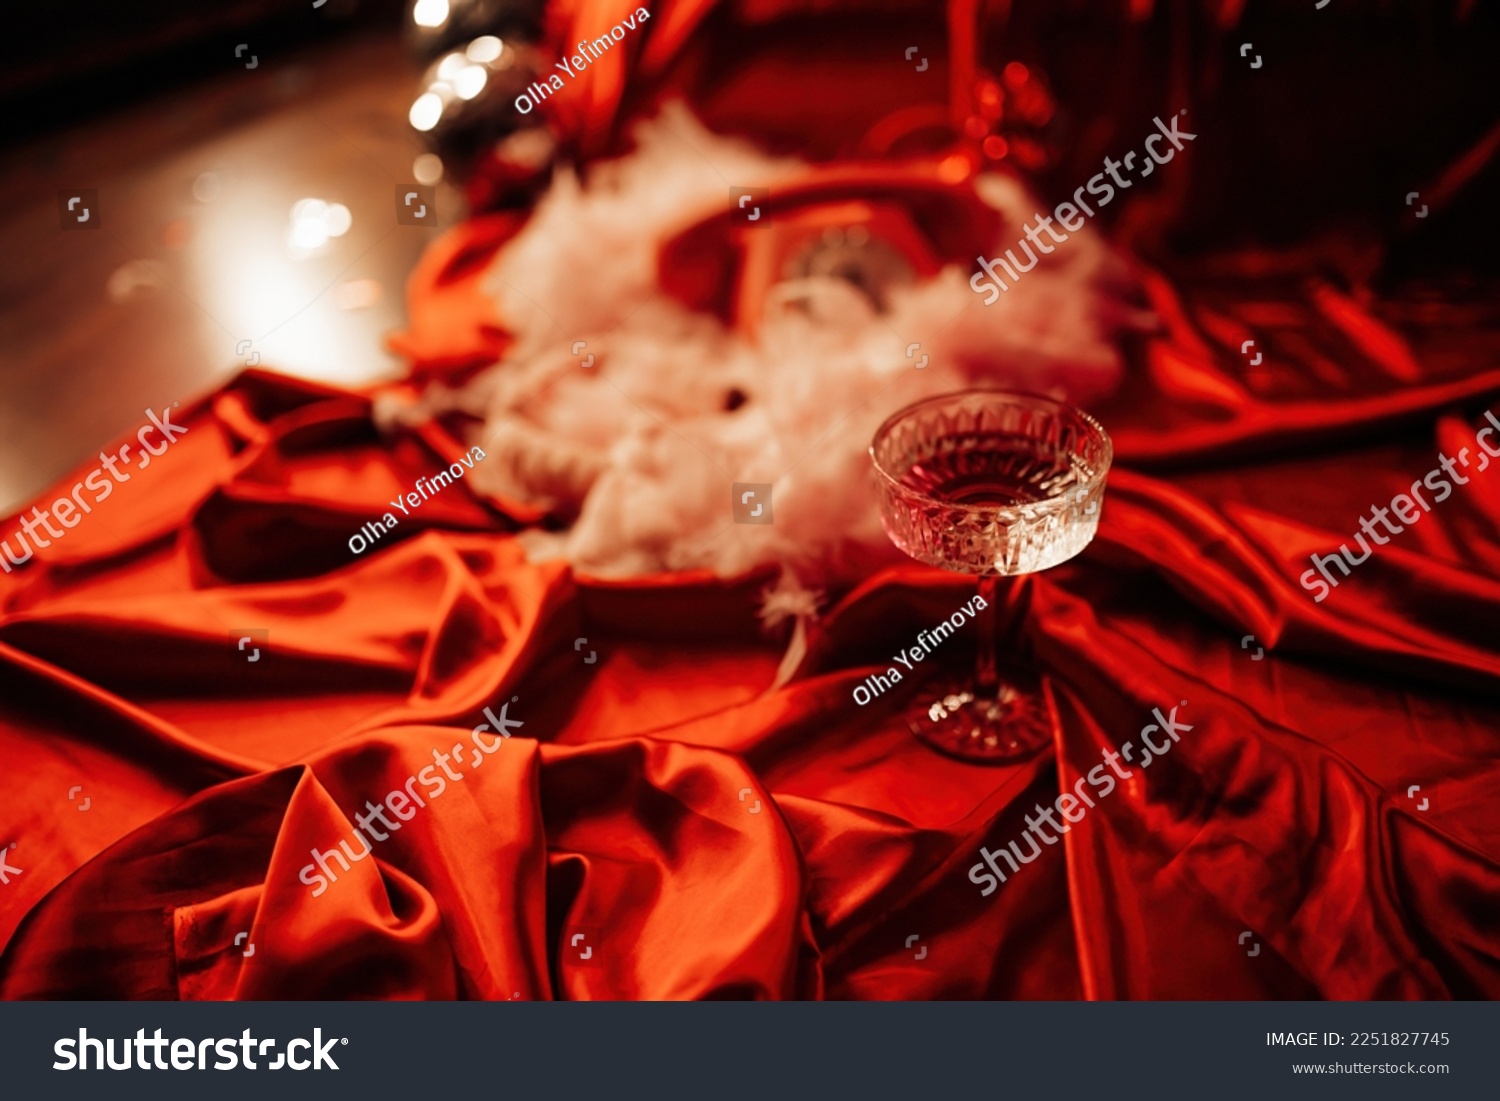 Extravagant glamour background with coupe glass of sparkly wine for love party at muffled light. Beautiful romantic burlesque place for st valentines holiday in red silk glossy sheets #2251827745